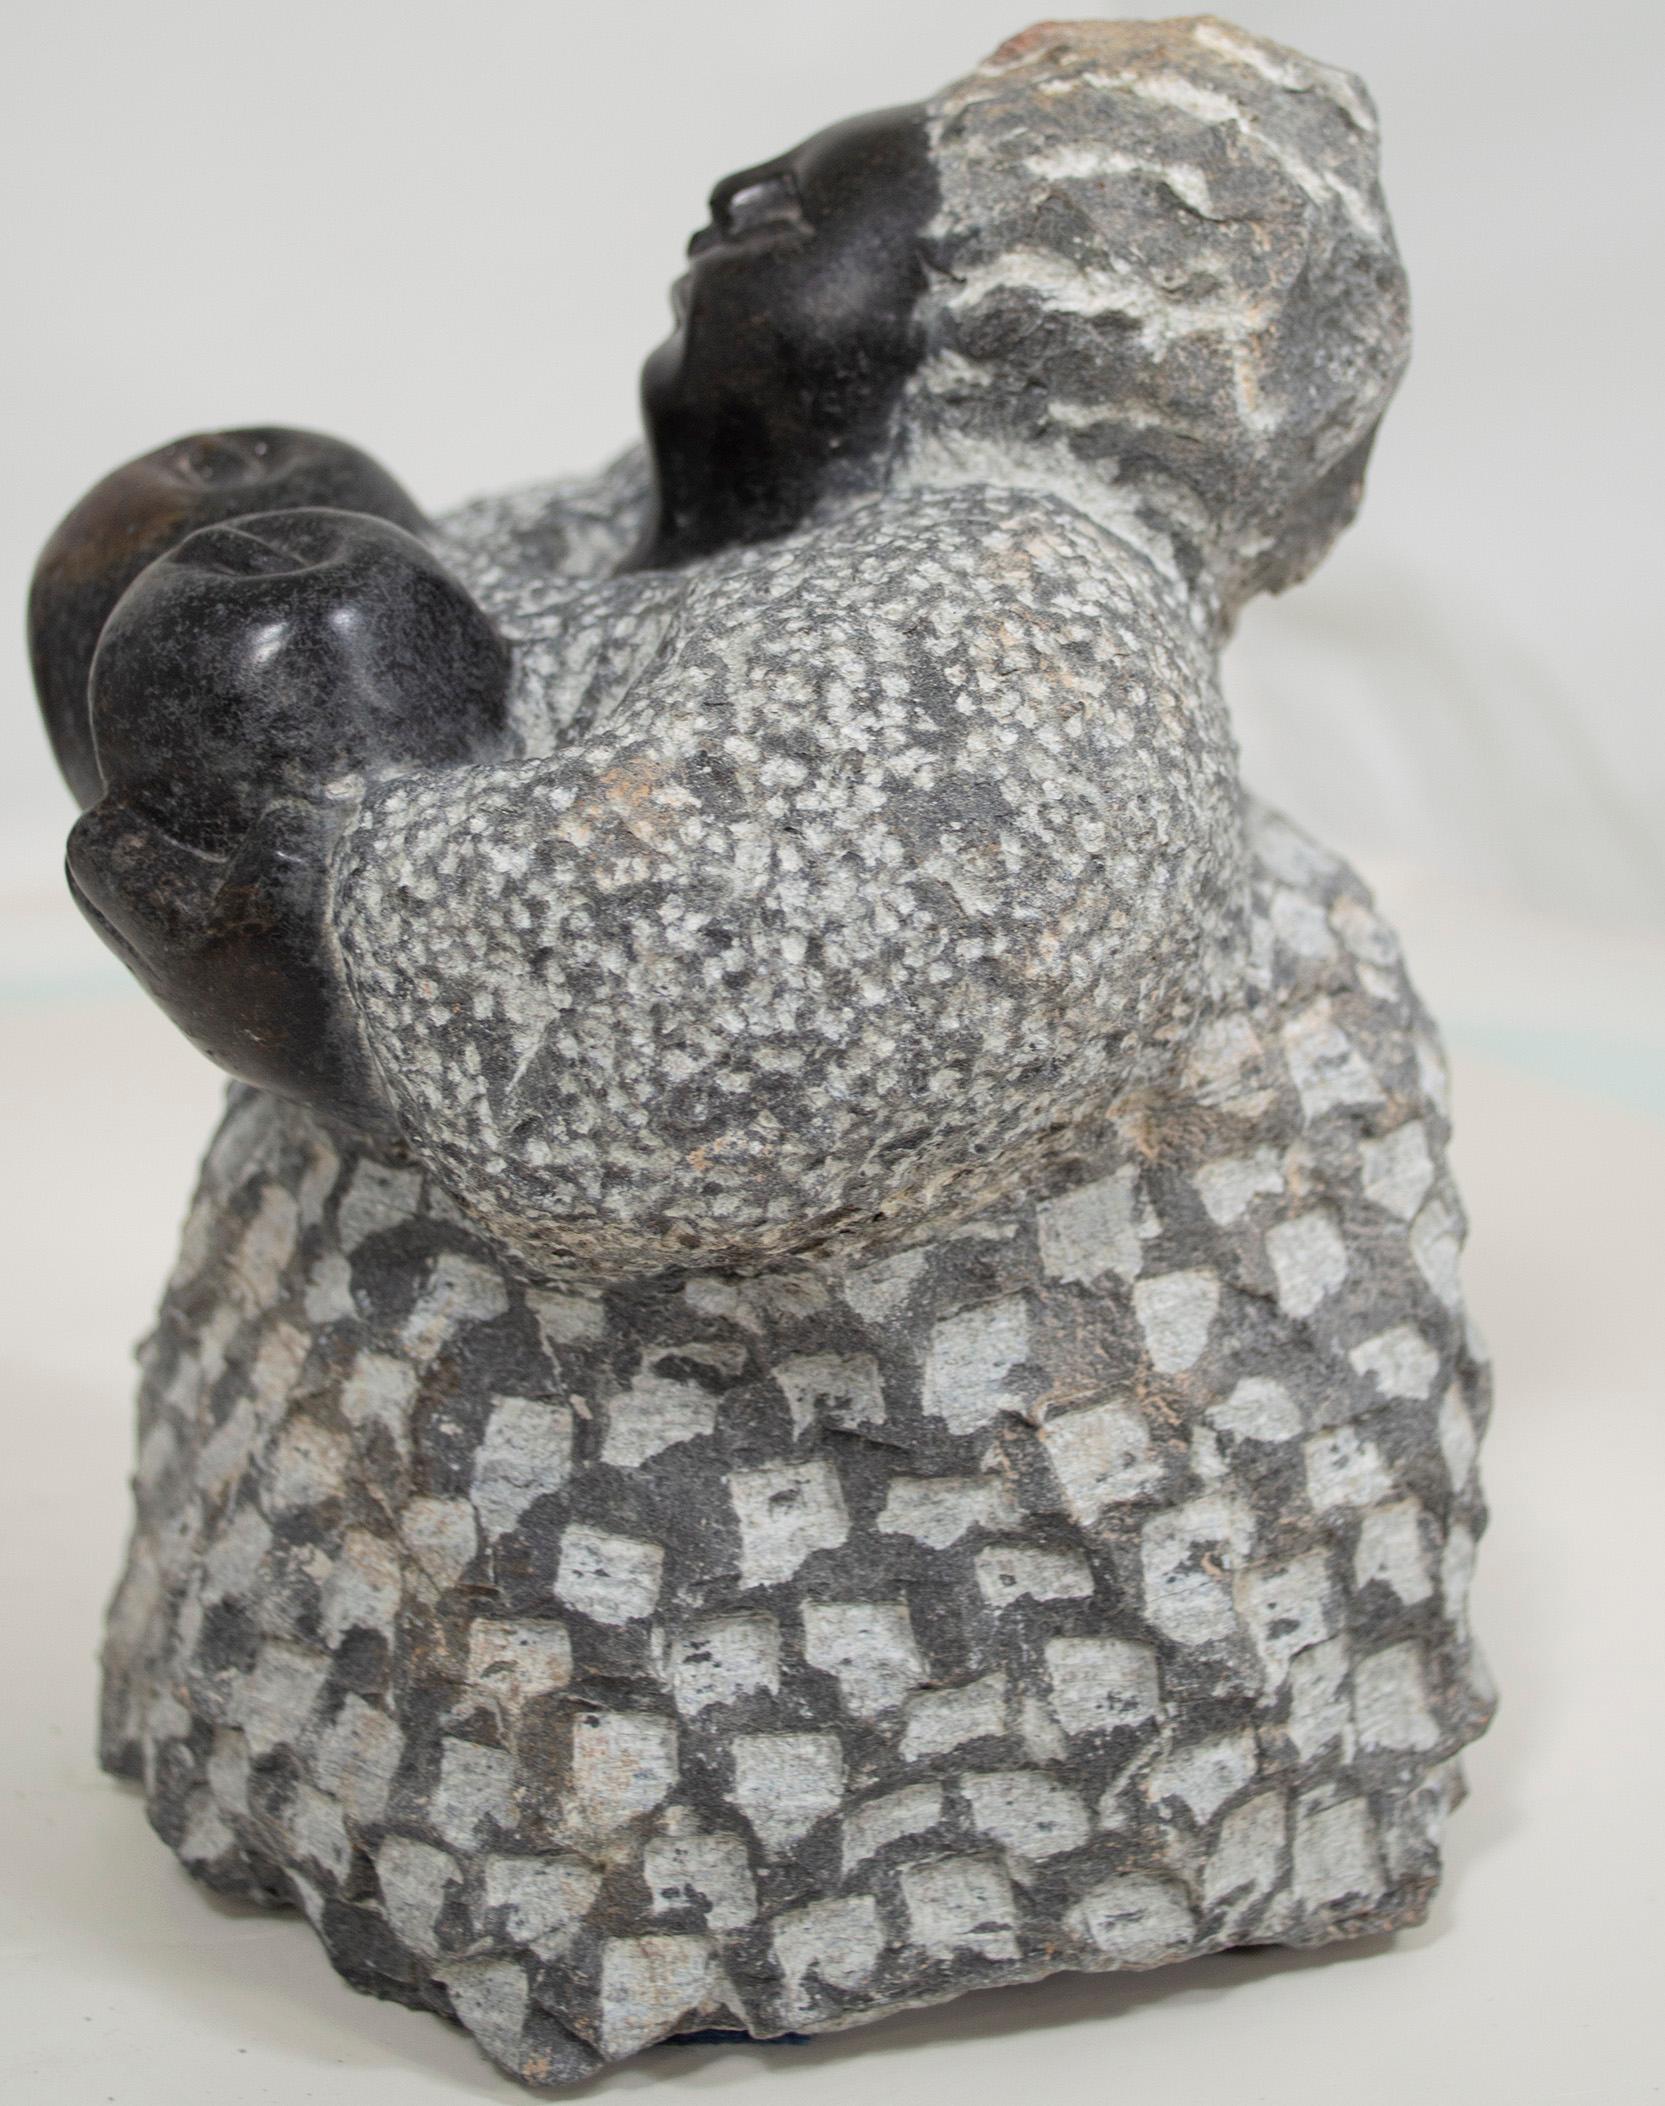 'Holding Apples' is an original black serpentine sculpture by the celebrated second generation Shona artist Colleen Madamombe. The sculpture presents a character common to Madamombe's work: a woman with a round face and wearing a billowing dress. In